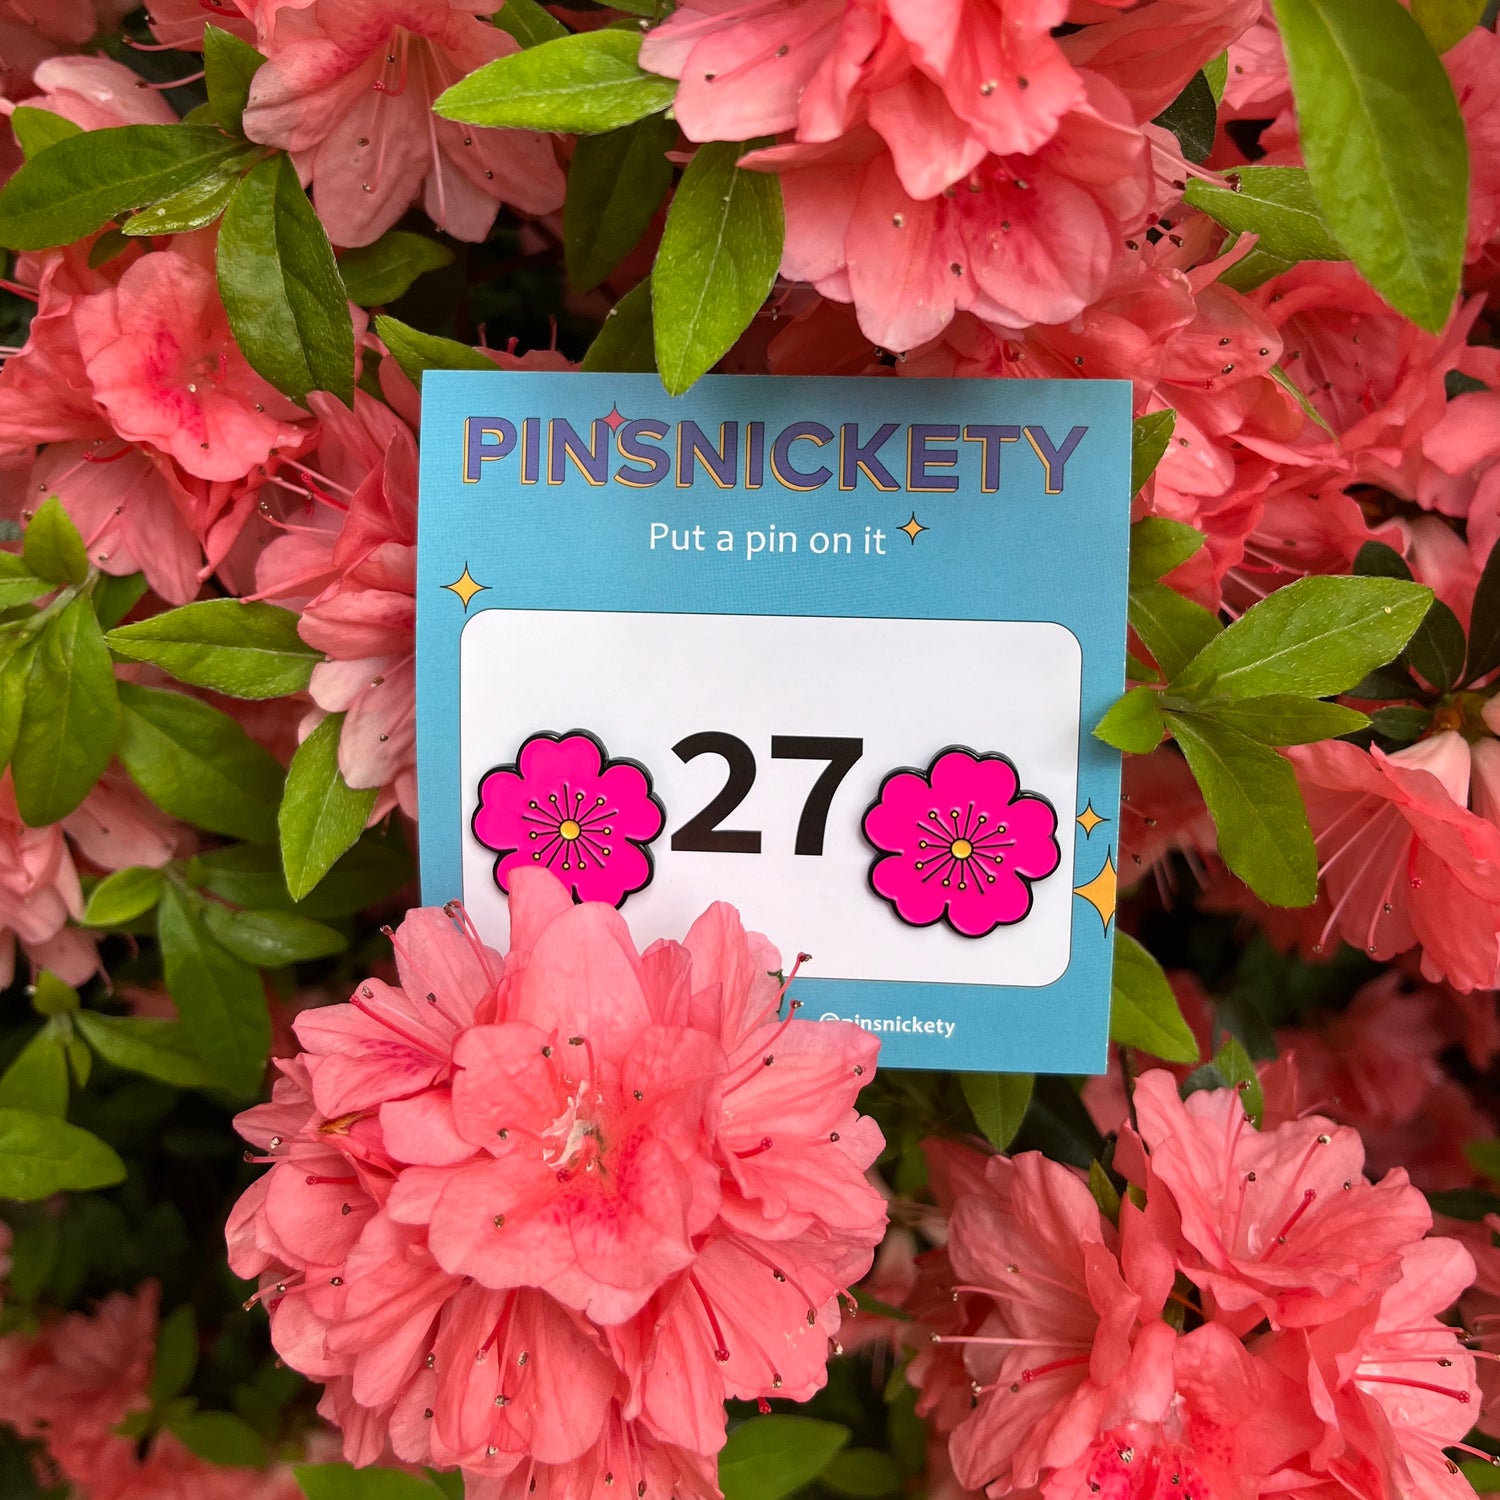 pinsnickety pink poppy horse show number pins in a bush with pink flowers